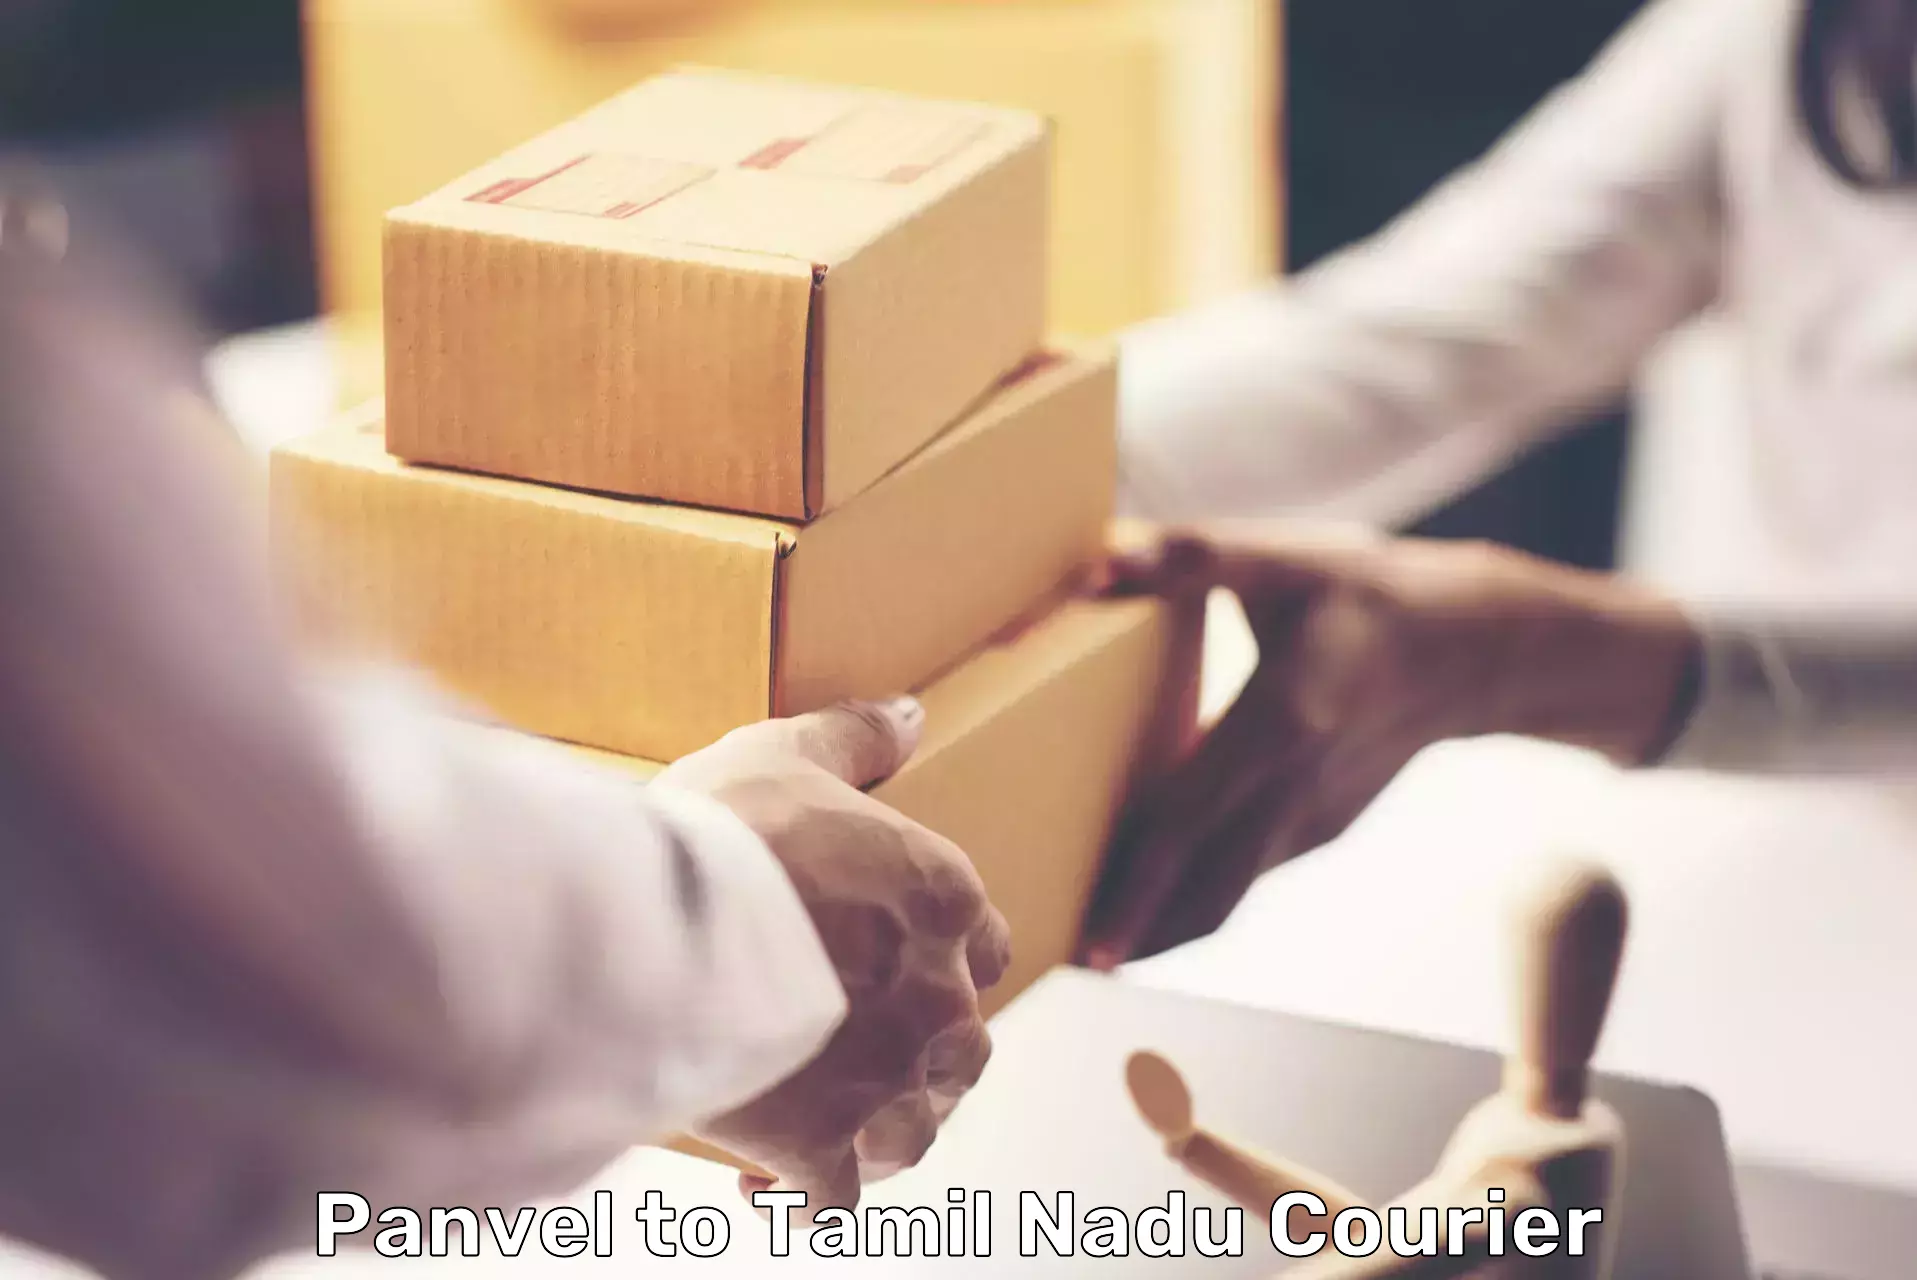 Courier tracking online Panvel to Valparai